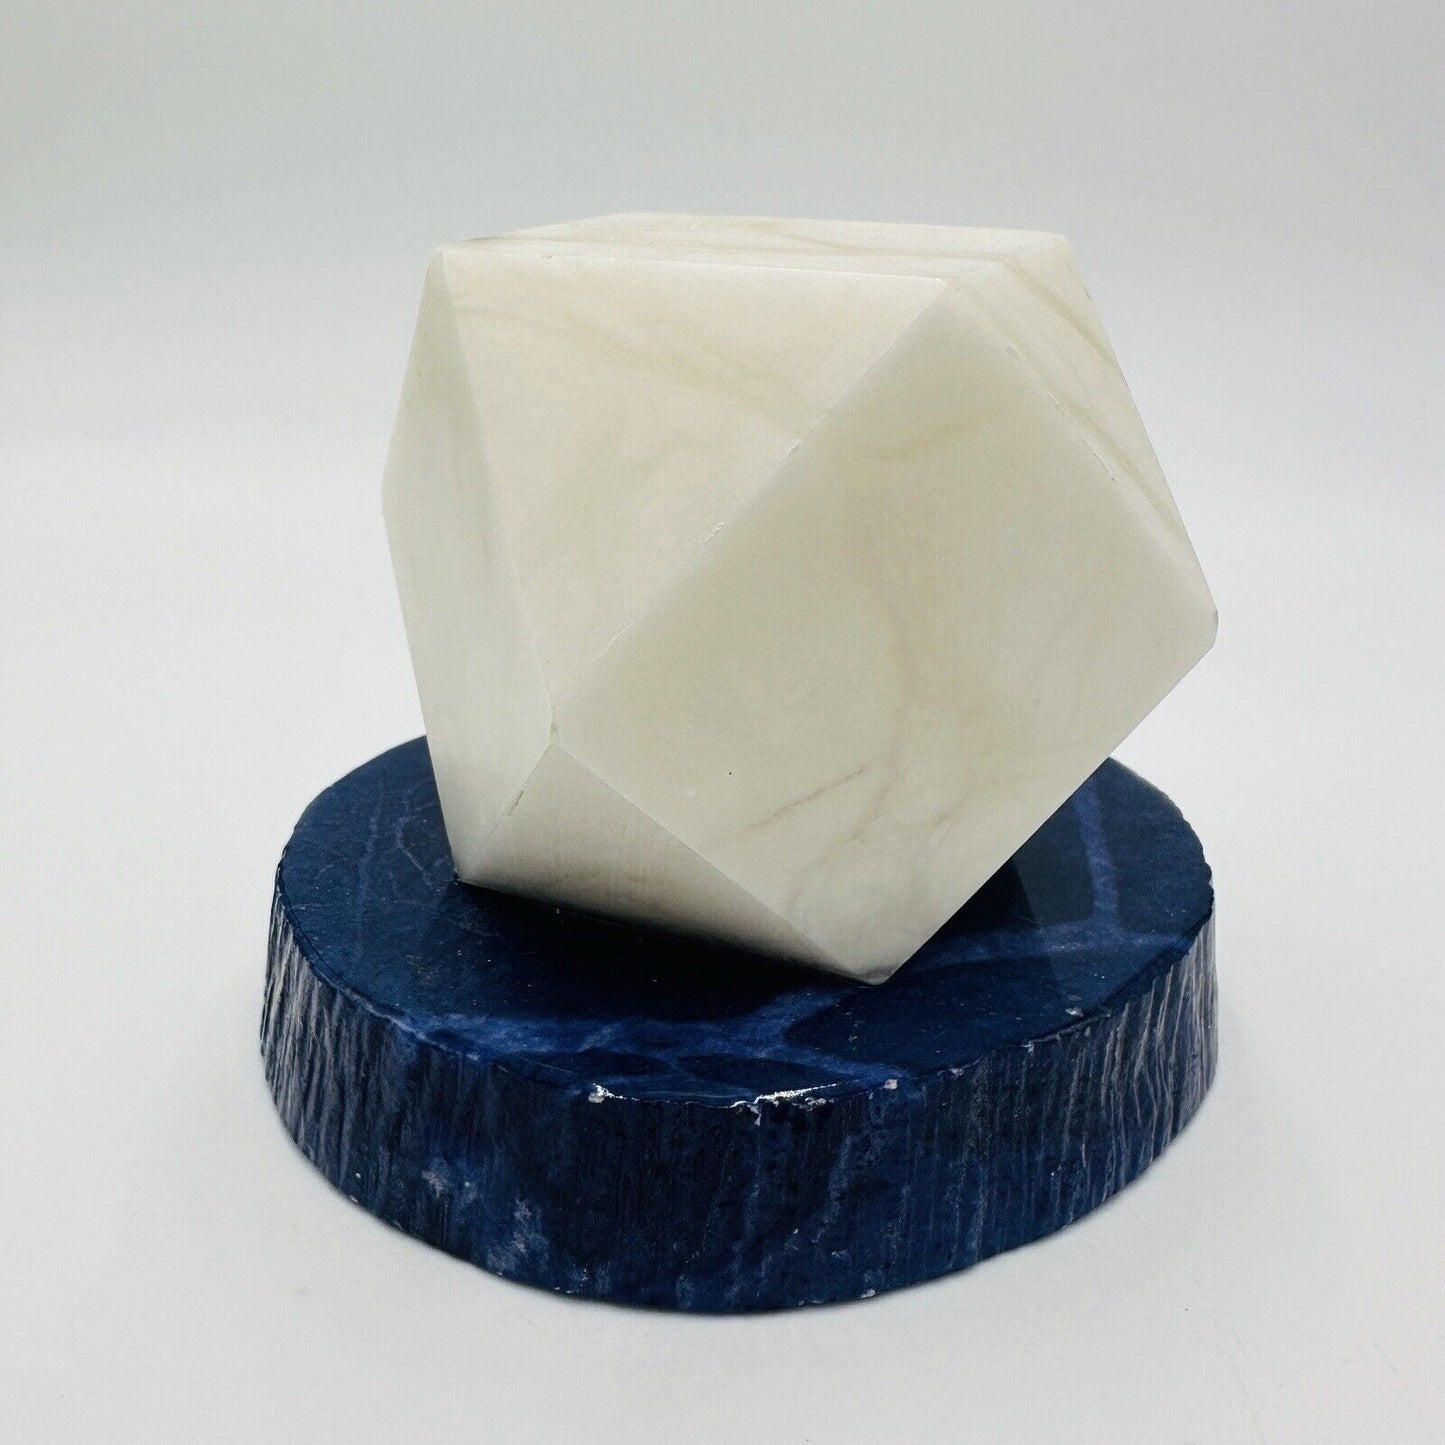 Genuine Alabaster  Paperweight Hand Carved Mcm Geometric Shape Italy Office Deco